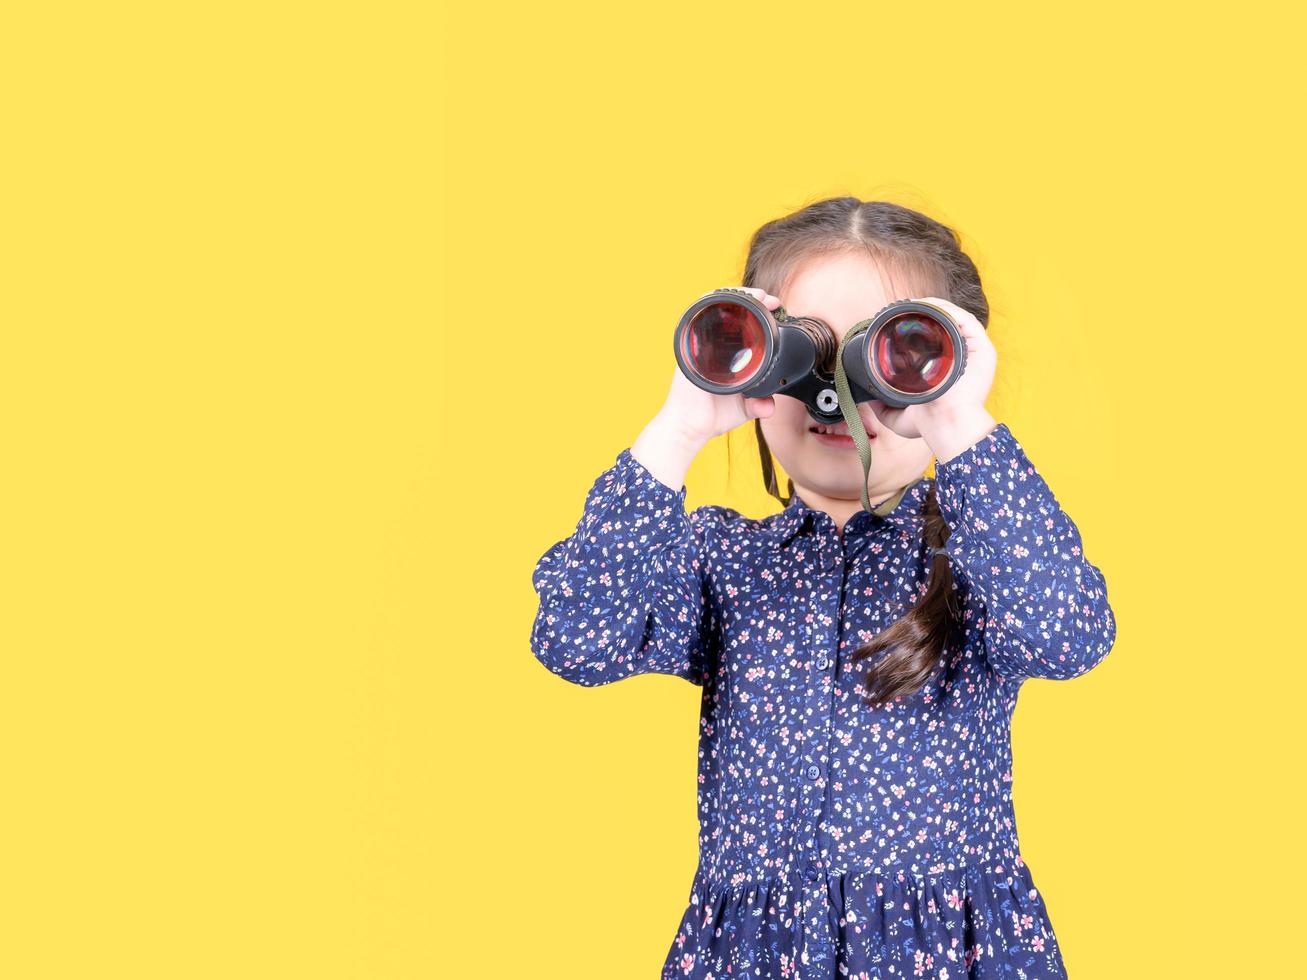 A cute girl raises a binoculars to look at the outside world through the lens photo